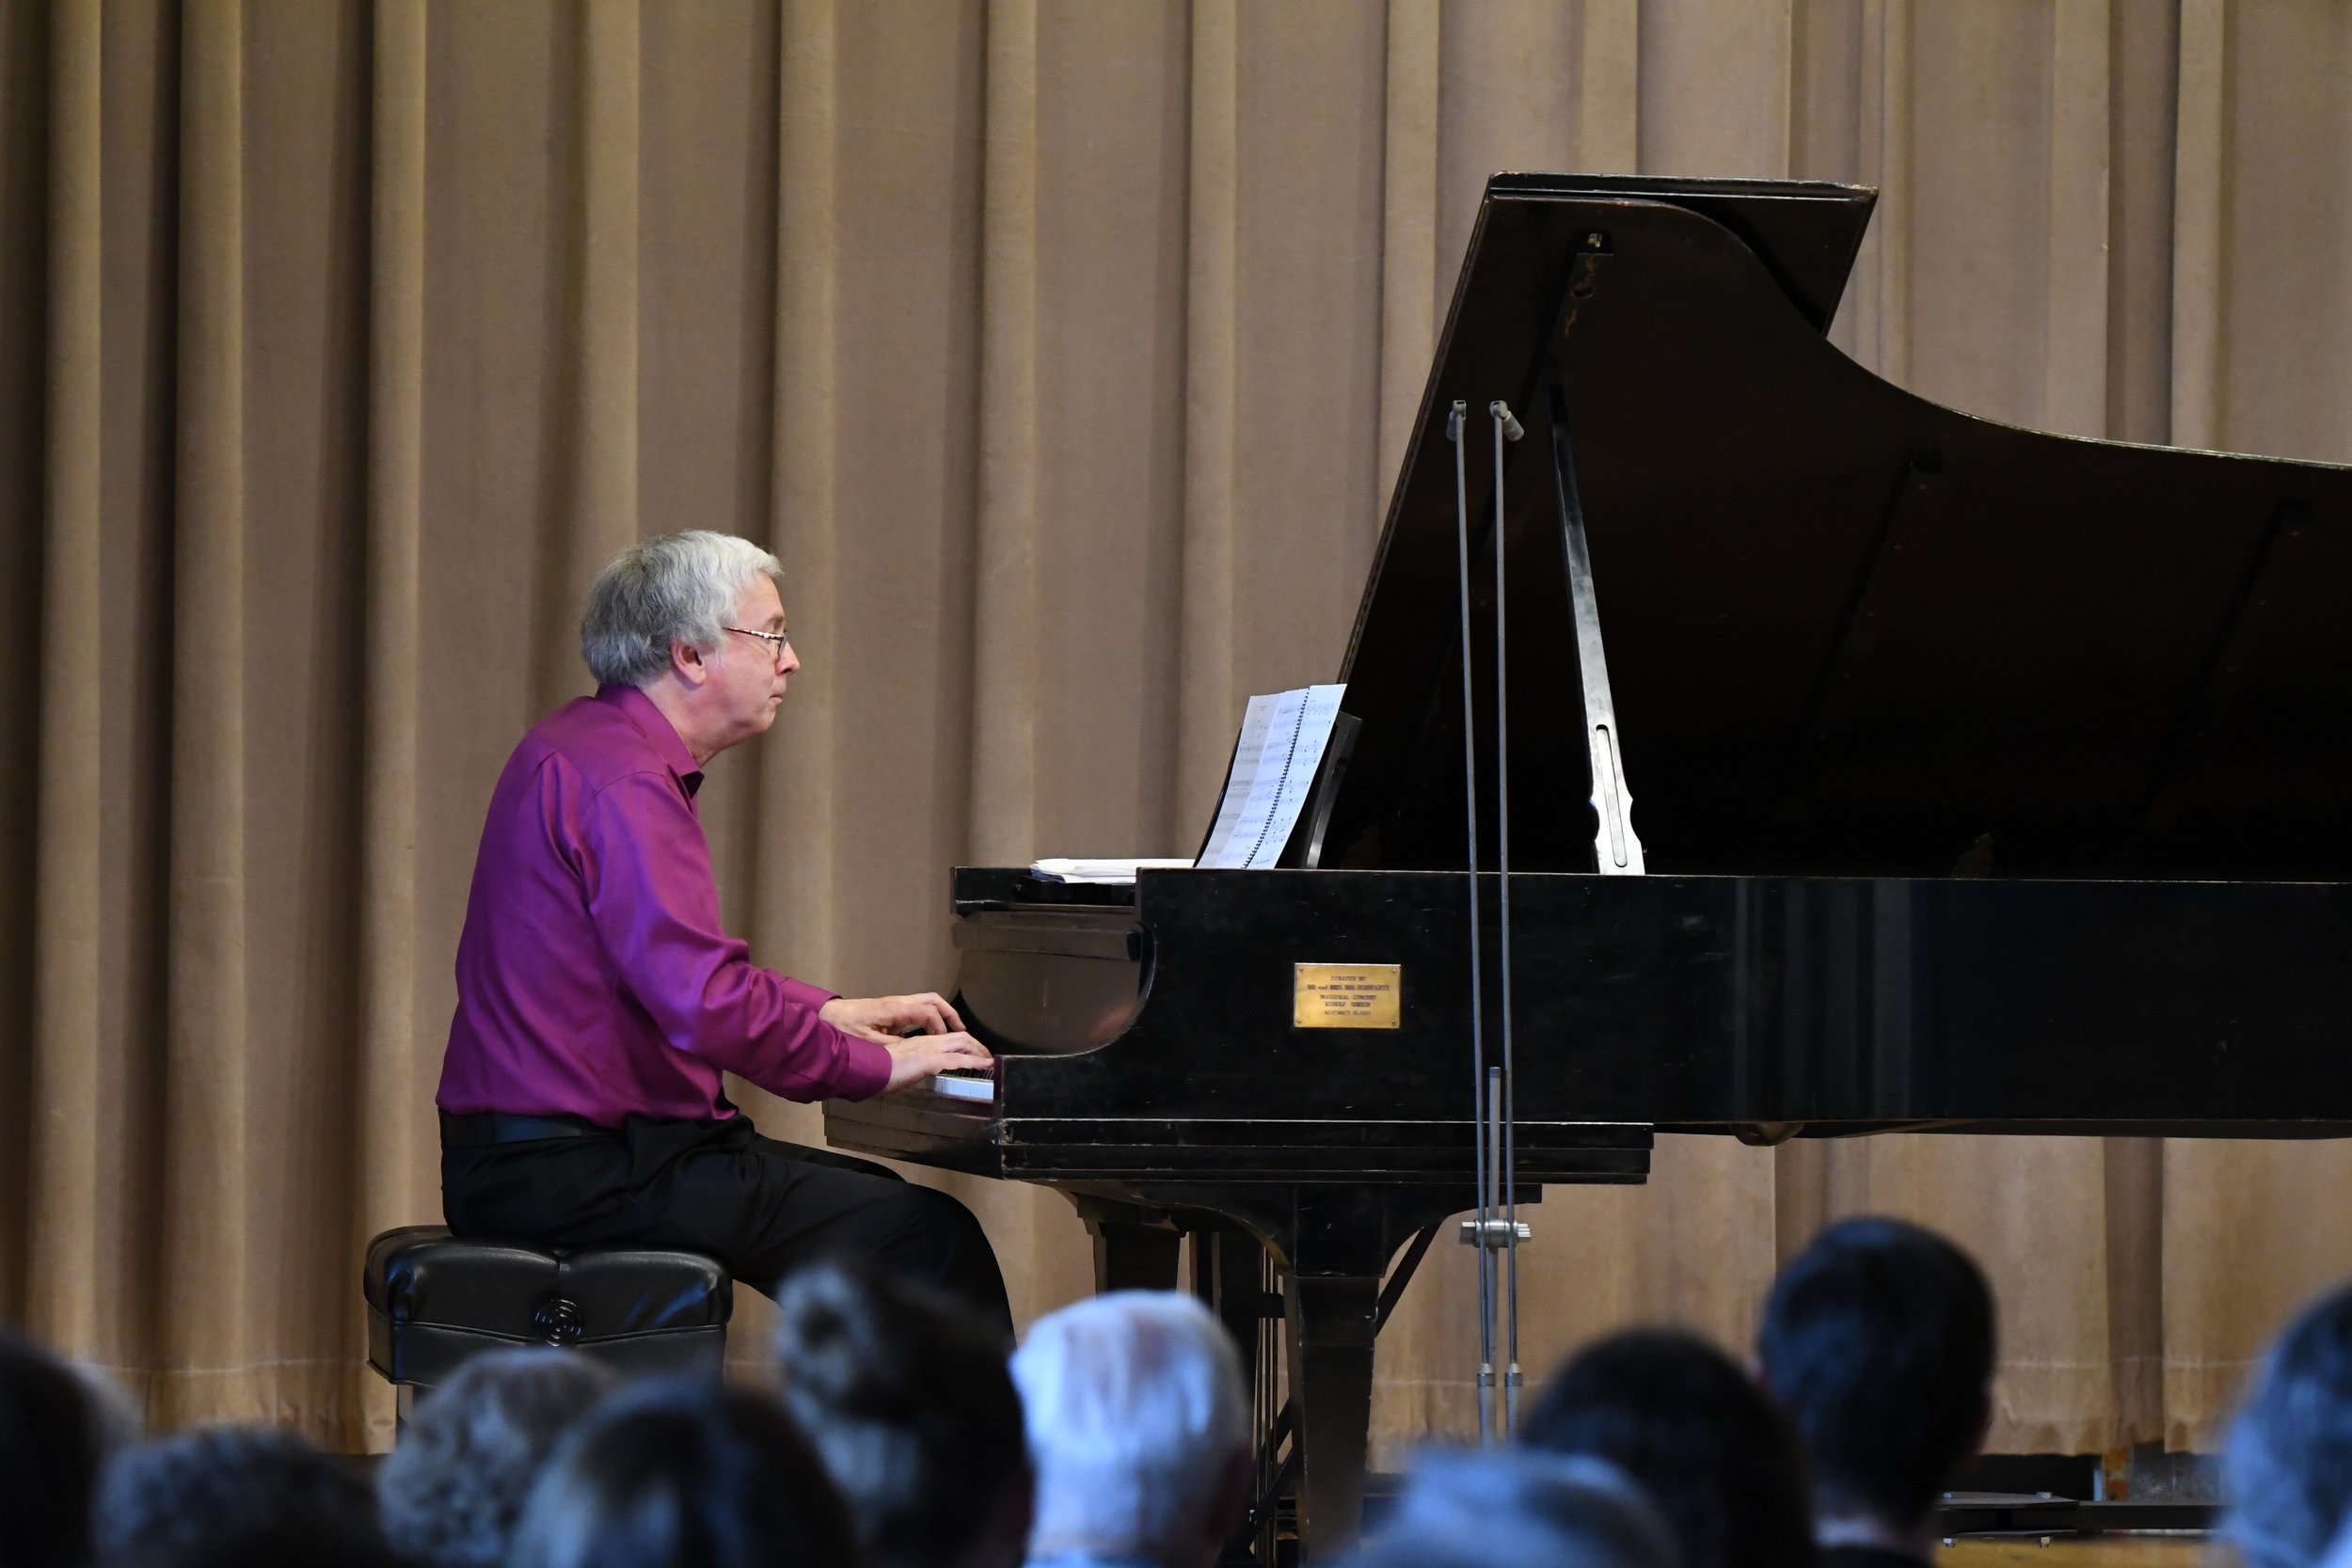  Charles Abramovic performs “Toccatina” by Richard Wernick 